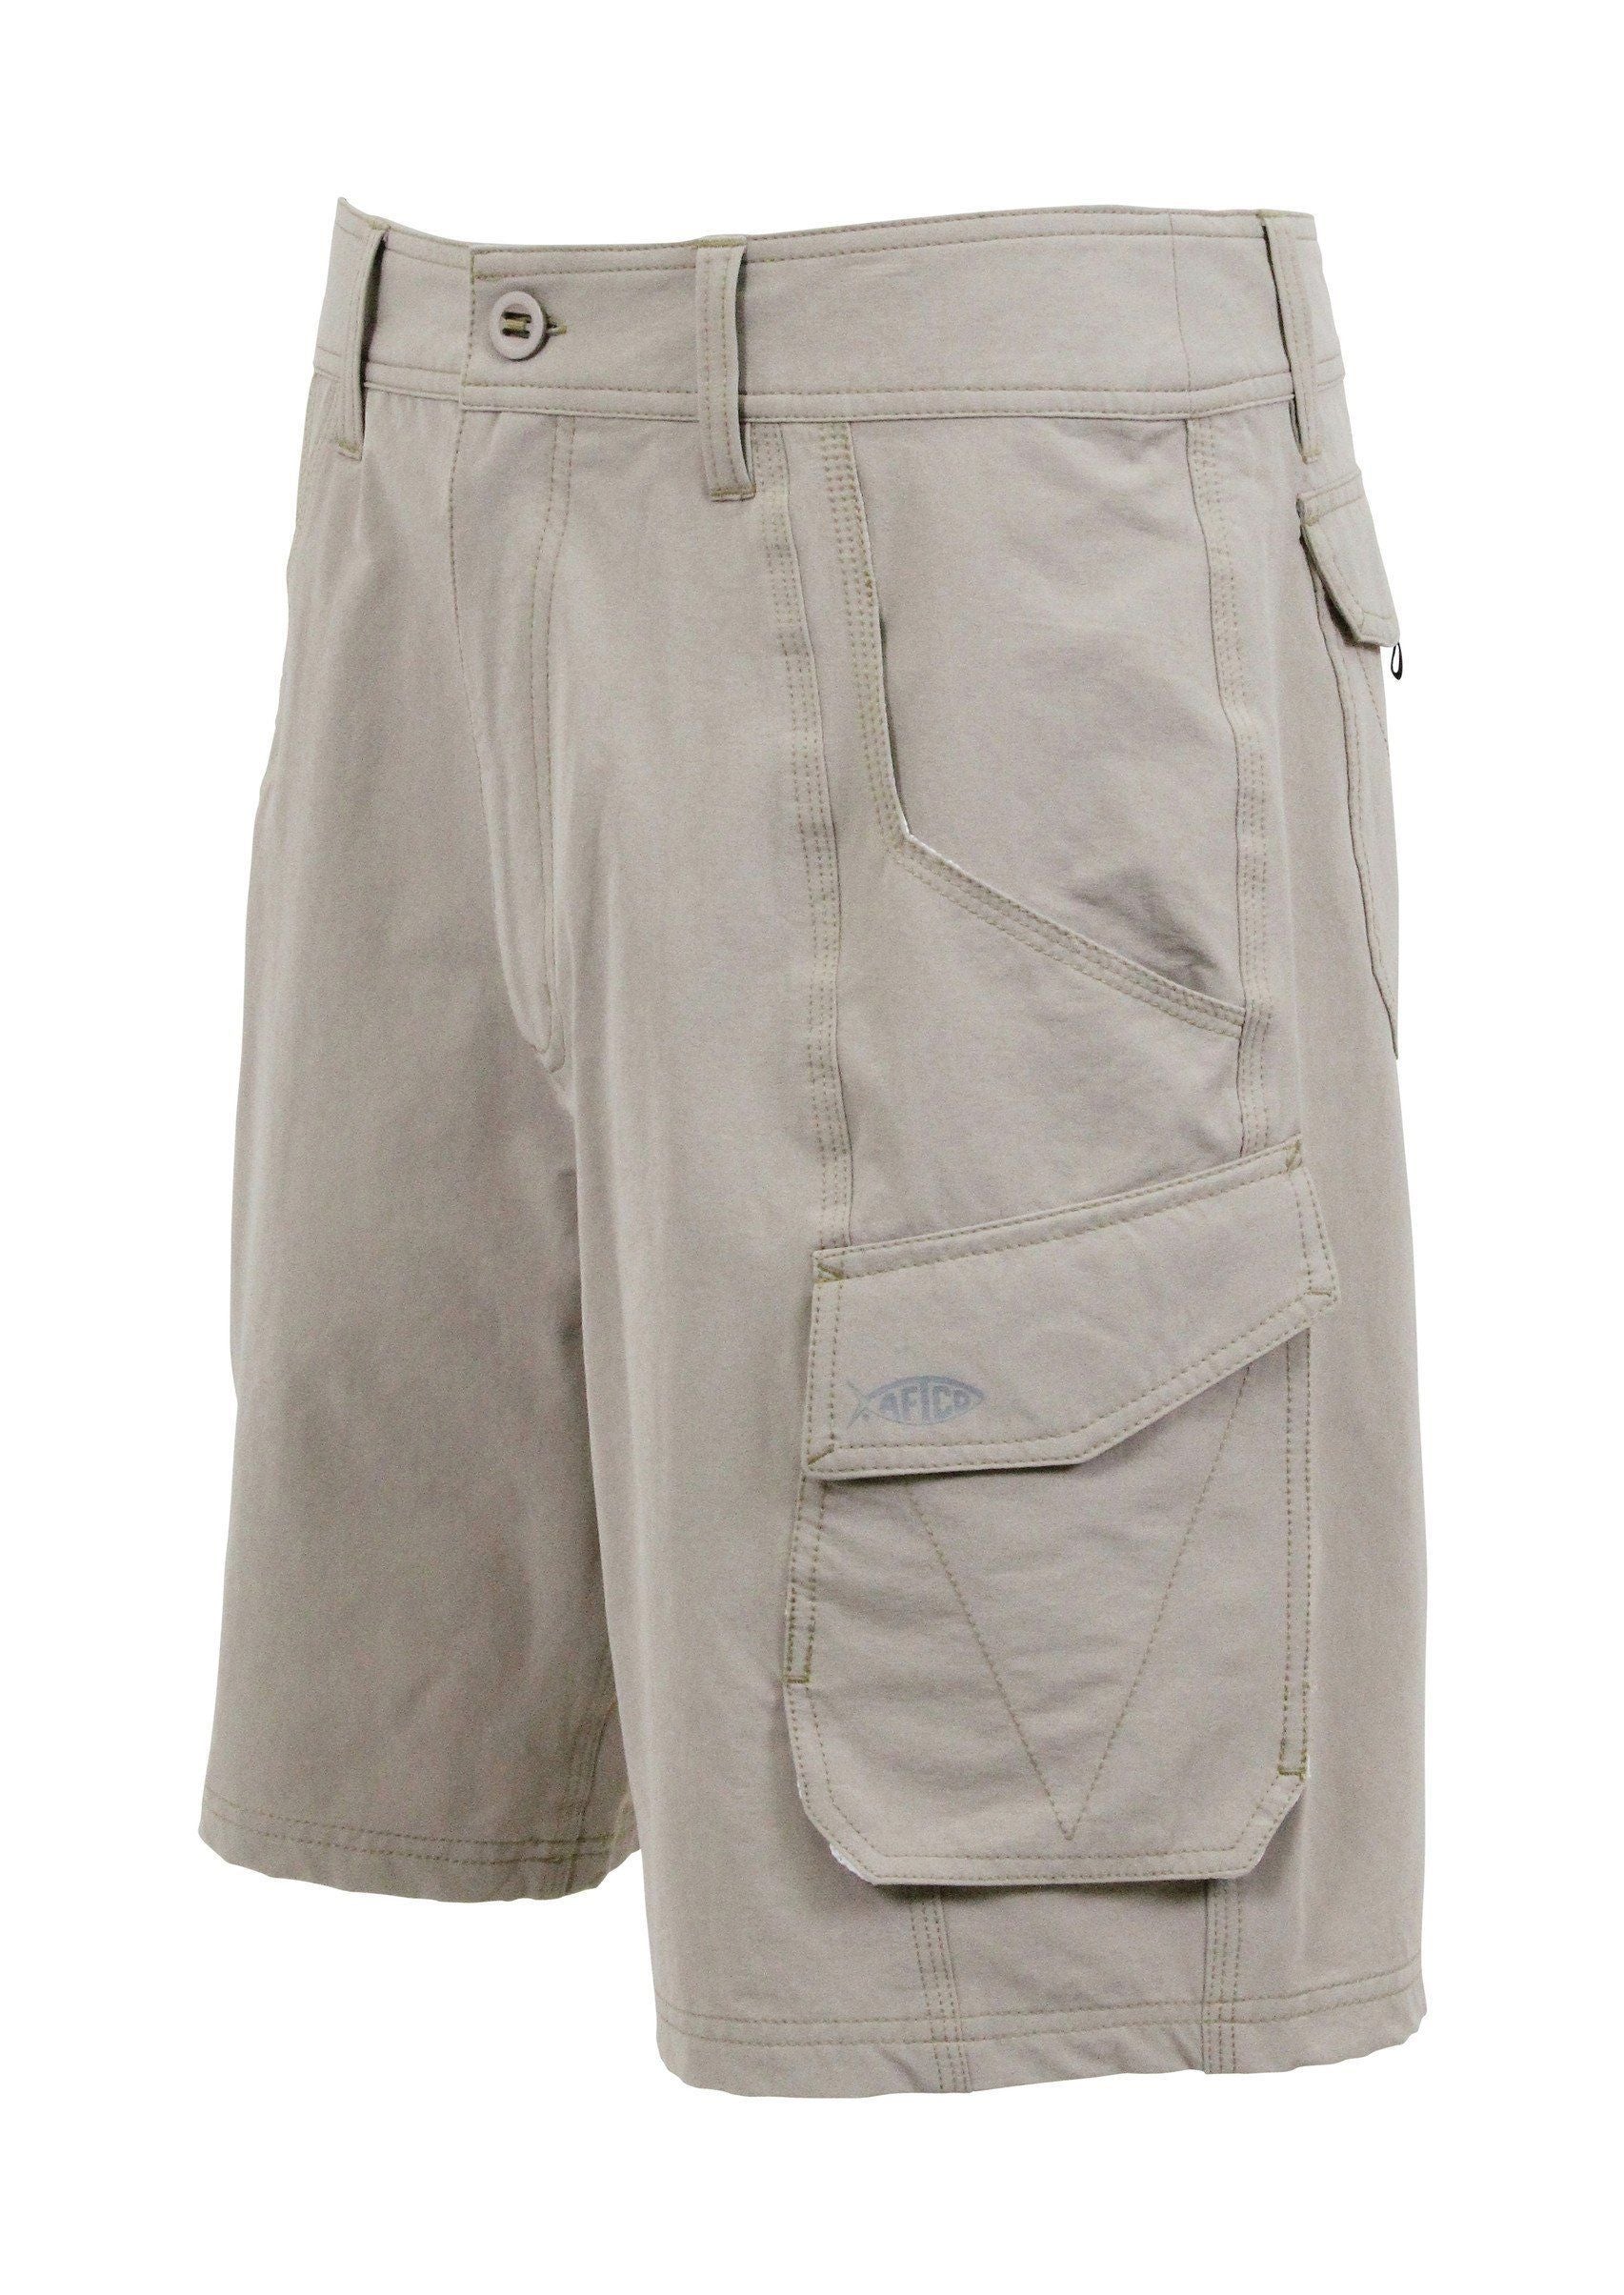 AFTCO Stealth Fishing Shorts 